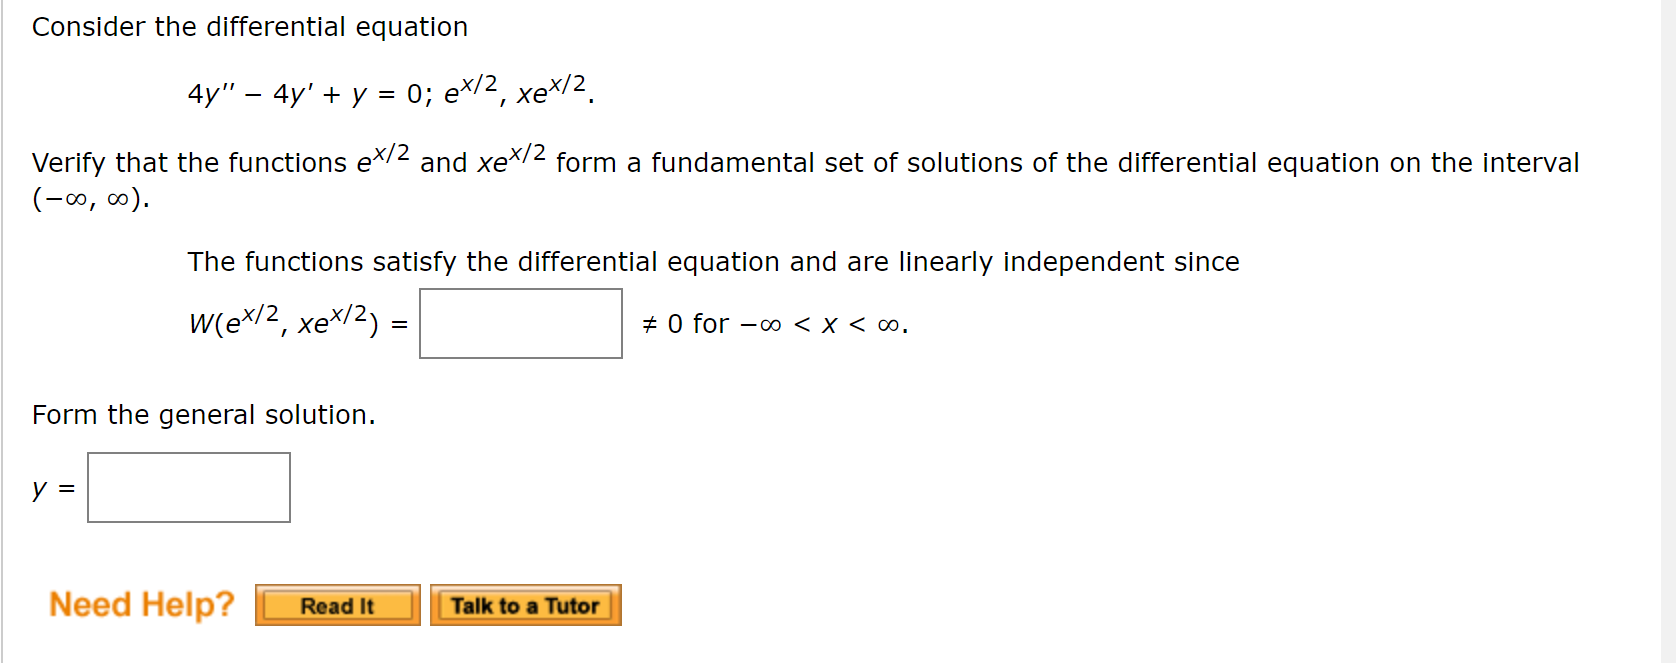 Consider the differential equation
4y" — 4y' + у 3D 0; еx/2,
xeX/2.
Verify that the functions e2 and xeX2 form a fundamental set of solutions of the differential equation on the interval
(-0, ∞).
The functions satisfy the differential equation and are linearly independent since
W(ex/2, xe*/2) =
+ 0 for -o0 < x < ∞.
Form the general solution.
y =
